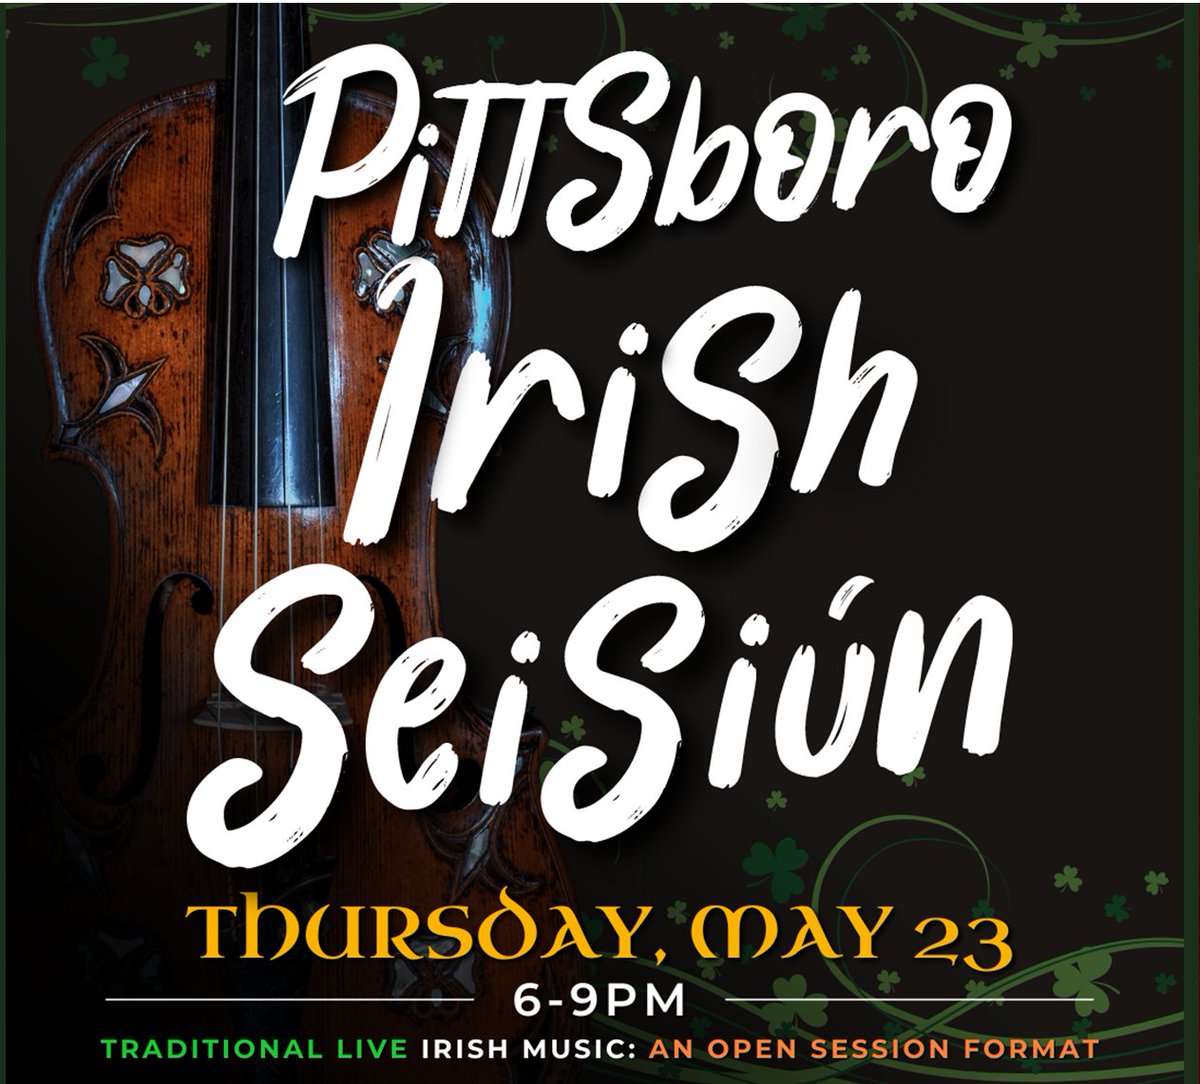 Doherty's Pittsboro hosts an Irish Seisiún! Whether you're starting your music journey, a seasoned pro, or love to listen, this is an event you will want to attend. Bring your instruments and your passion for Irish music, Thu, May 23, 6pm.

visitpittsboro.com/events/